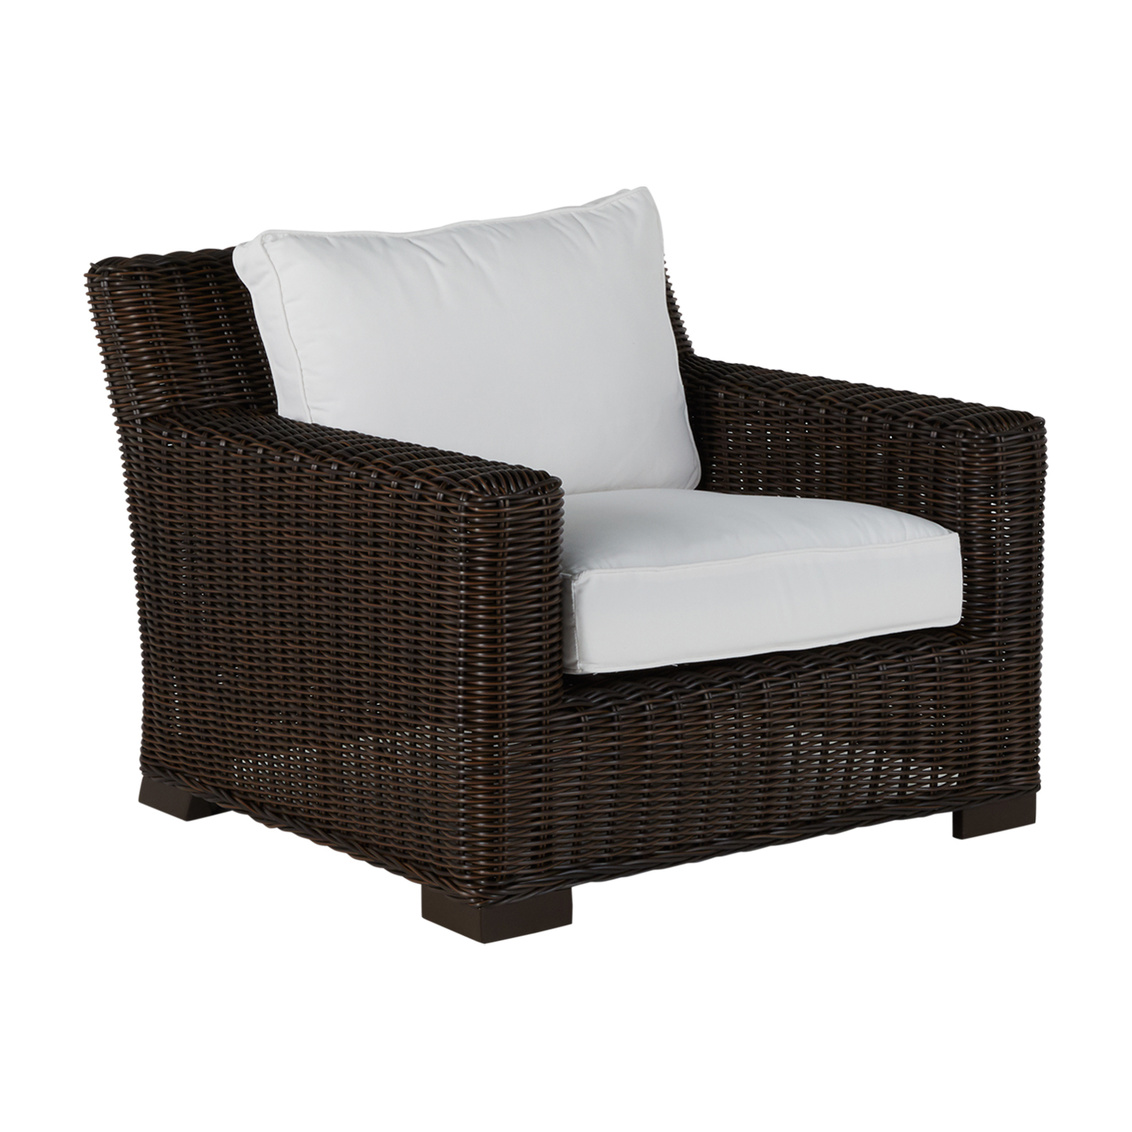 rustic lounge chair in black walnut – frame only product image